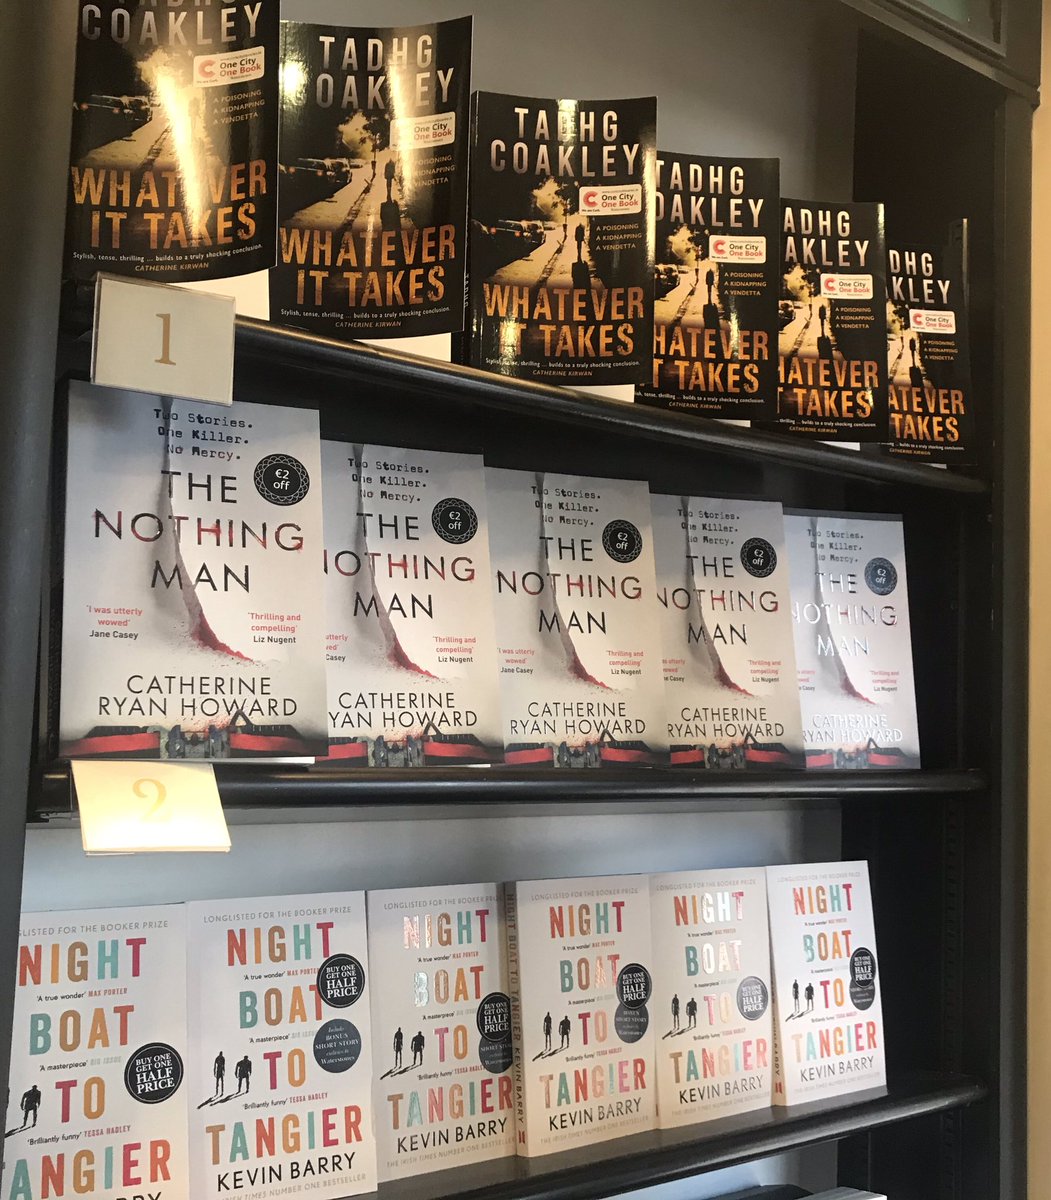 Thrilling to be at the top for the third week in a row in Waterstones, Cork. @WaterstonesCrk @MercierBooks @corkcitylibrary #OneCityOneBook #WeAreCork #WhateverItTakes #LivingTheDream